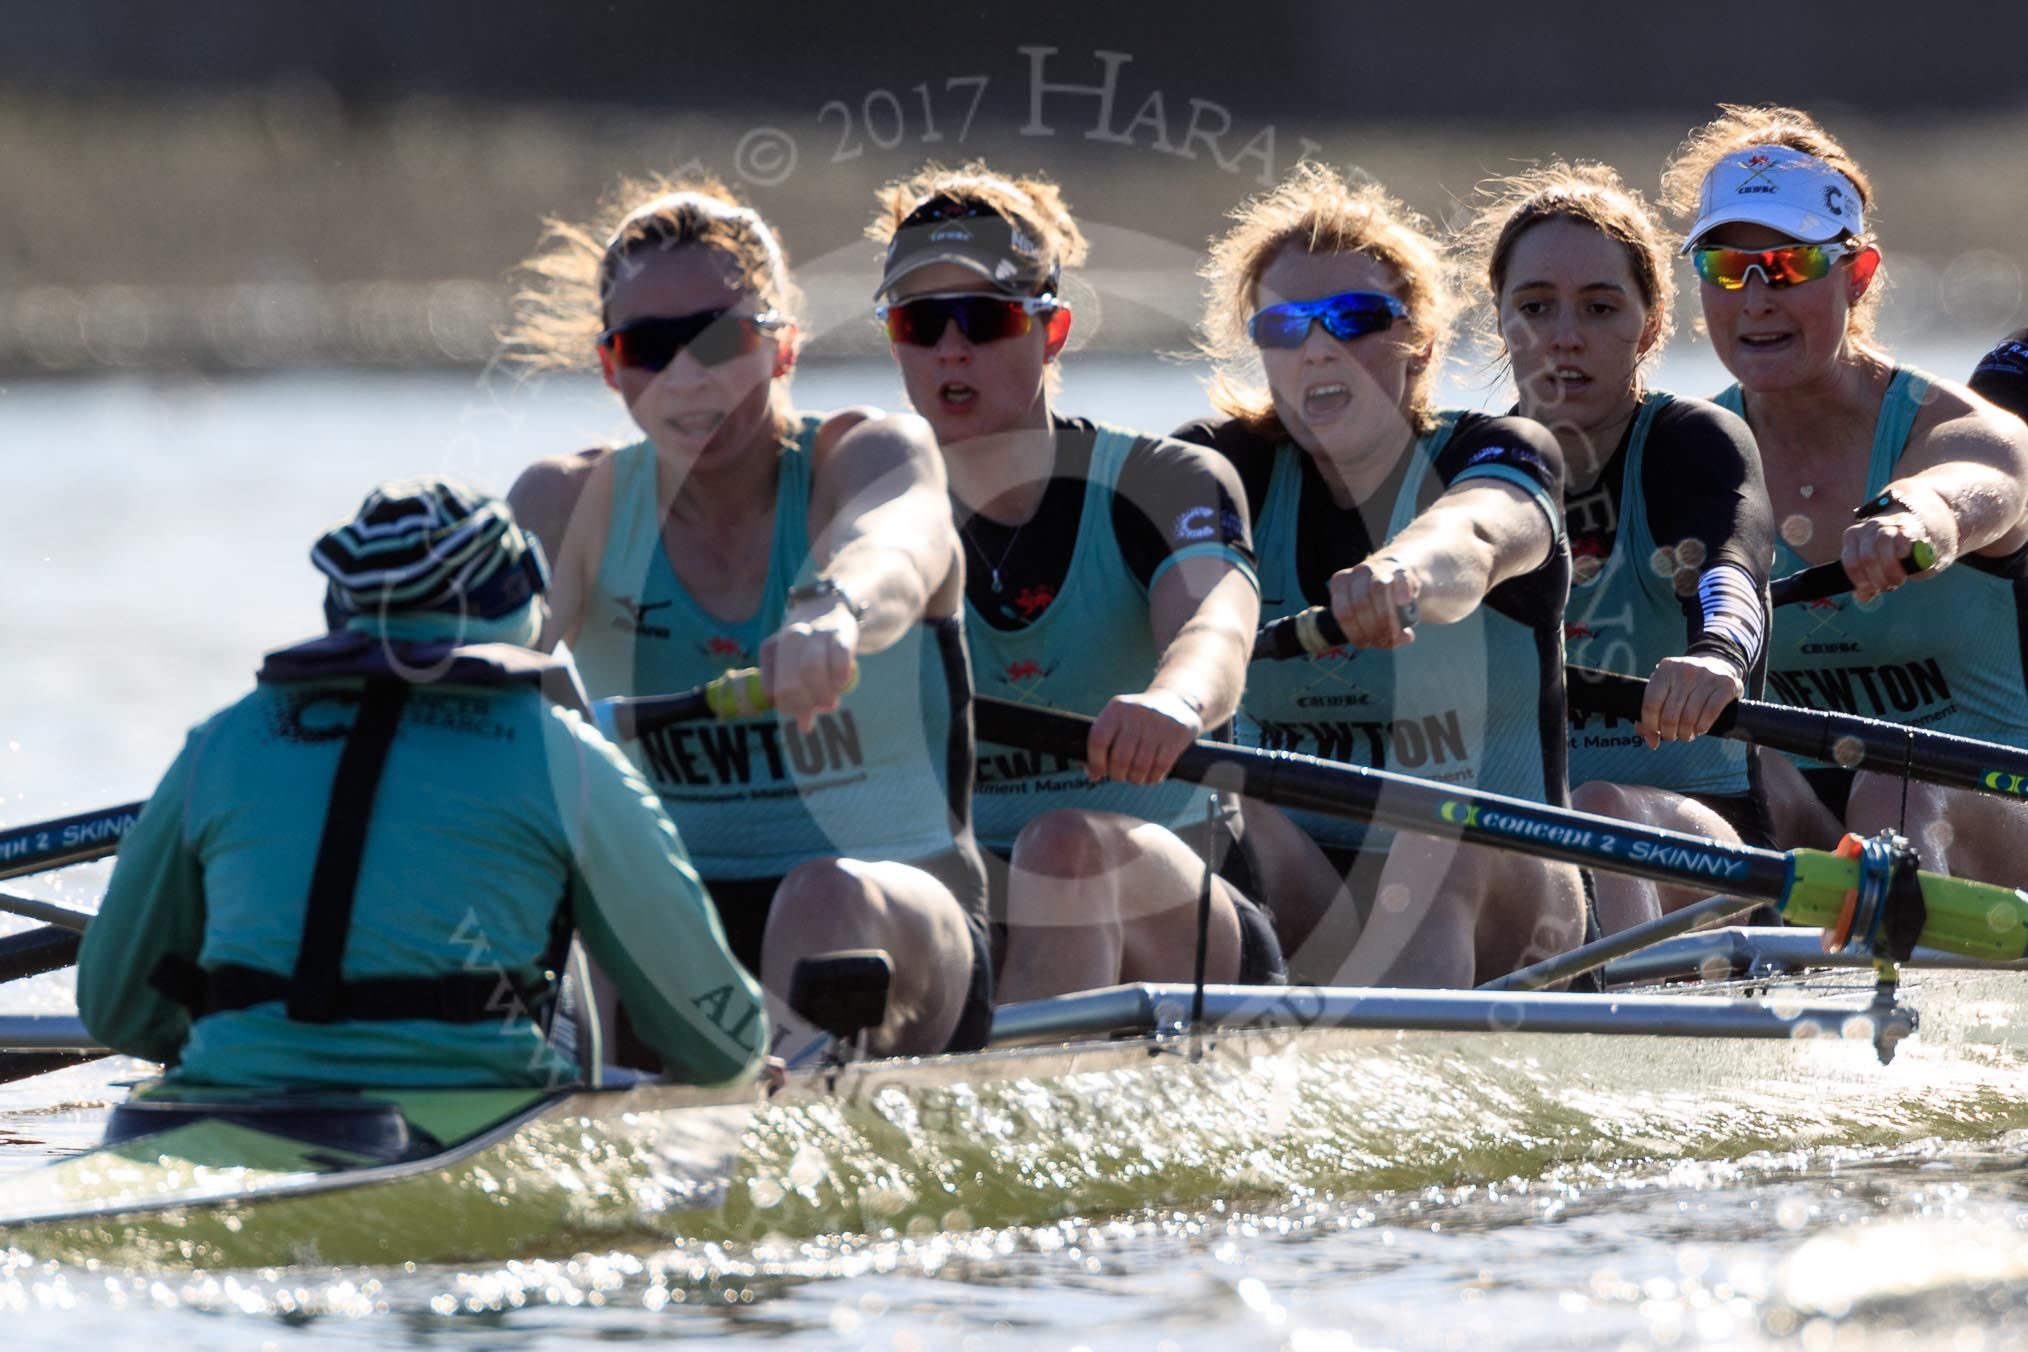 The Women's Boat Race season 2018 - fixture CUWBC vs. ULBC: The CUWBC Eight - here cox Sophie Shapter, stroke Tricia Smith, 7 Imogen Grant, 6 Anne Beenken, 5 Thea Zabell, 4 Paula Wesselmann.
River Thames between Putney Bridge and Mortlake,
London SW15,

United Kingdom,
on 17 February 2018 at 13:30, image #133